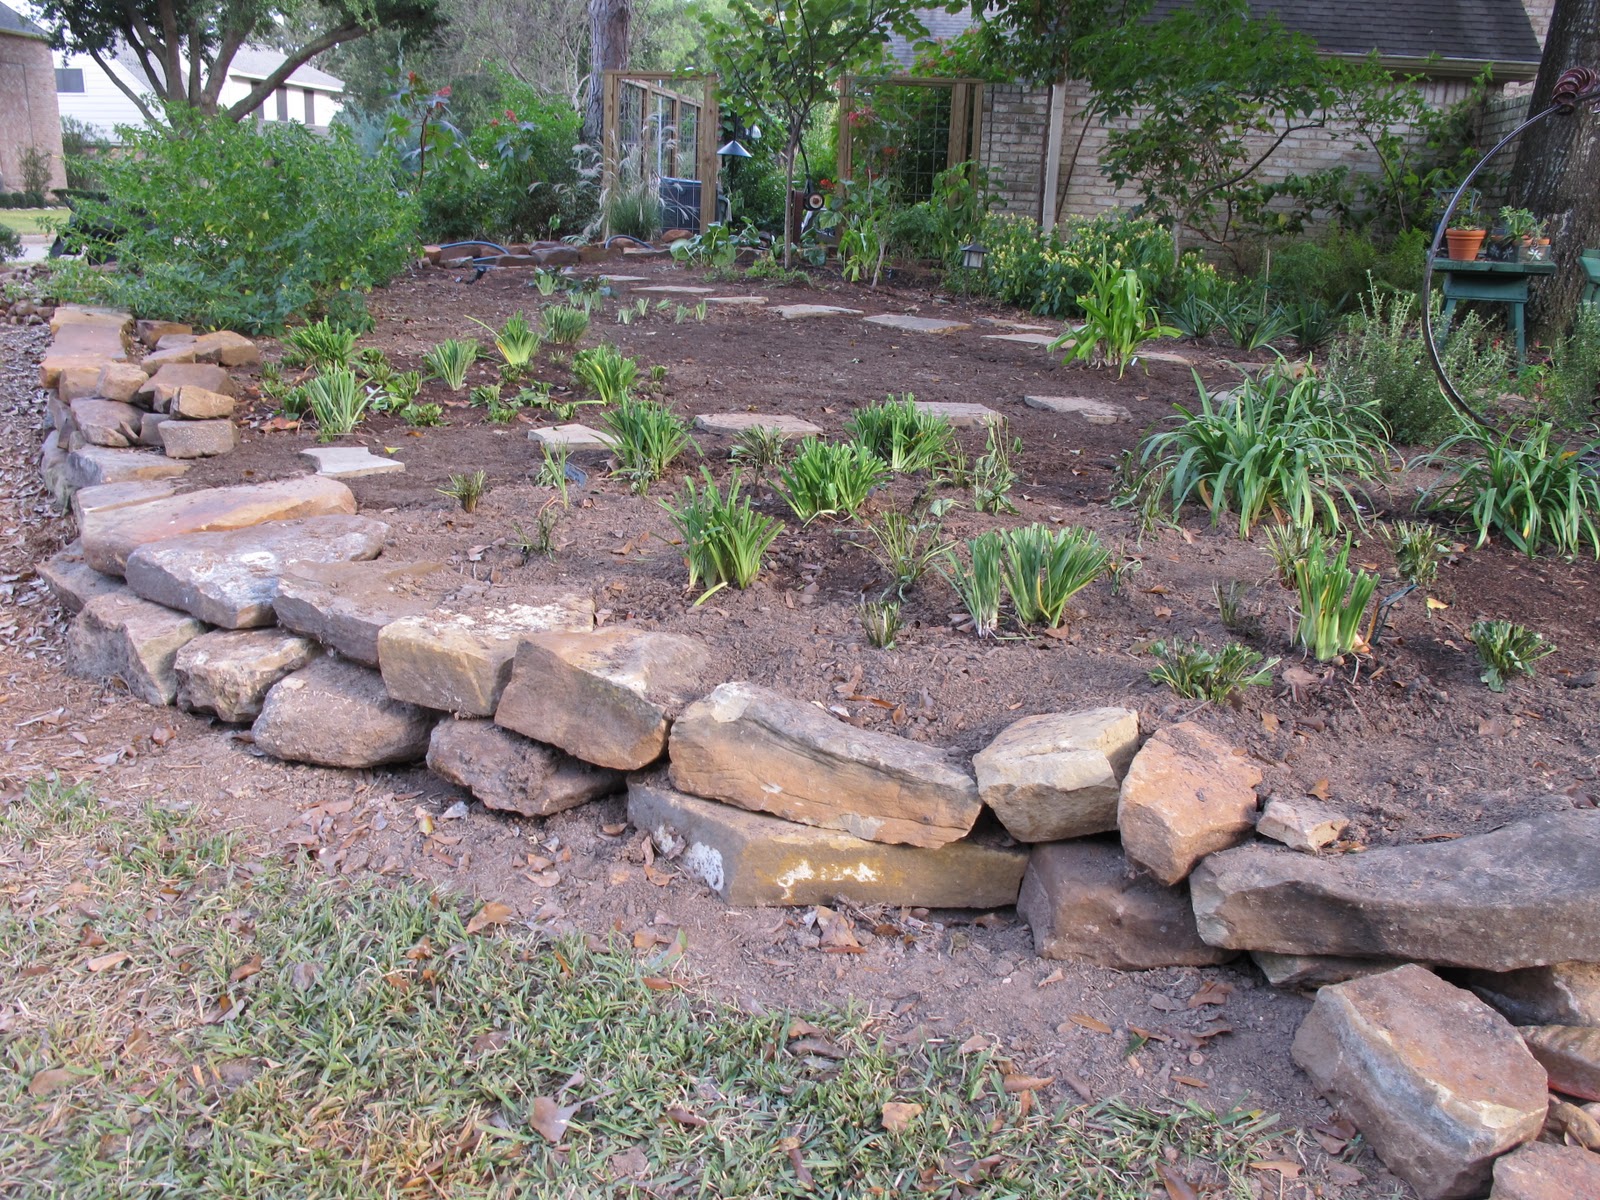 Flower Beds With Rock Borders - Home Decorating Ideas